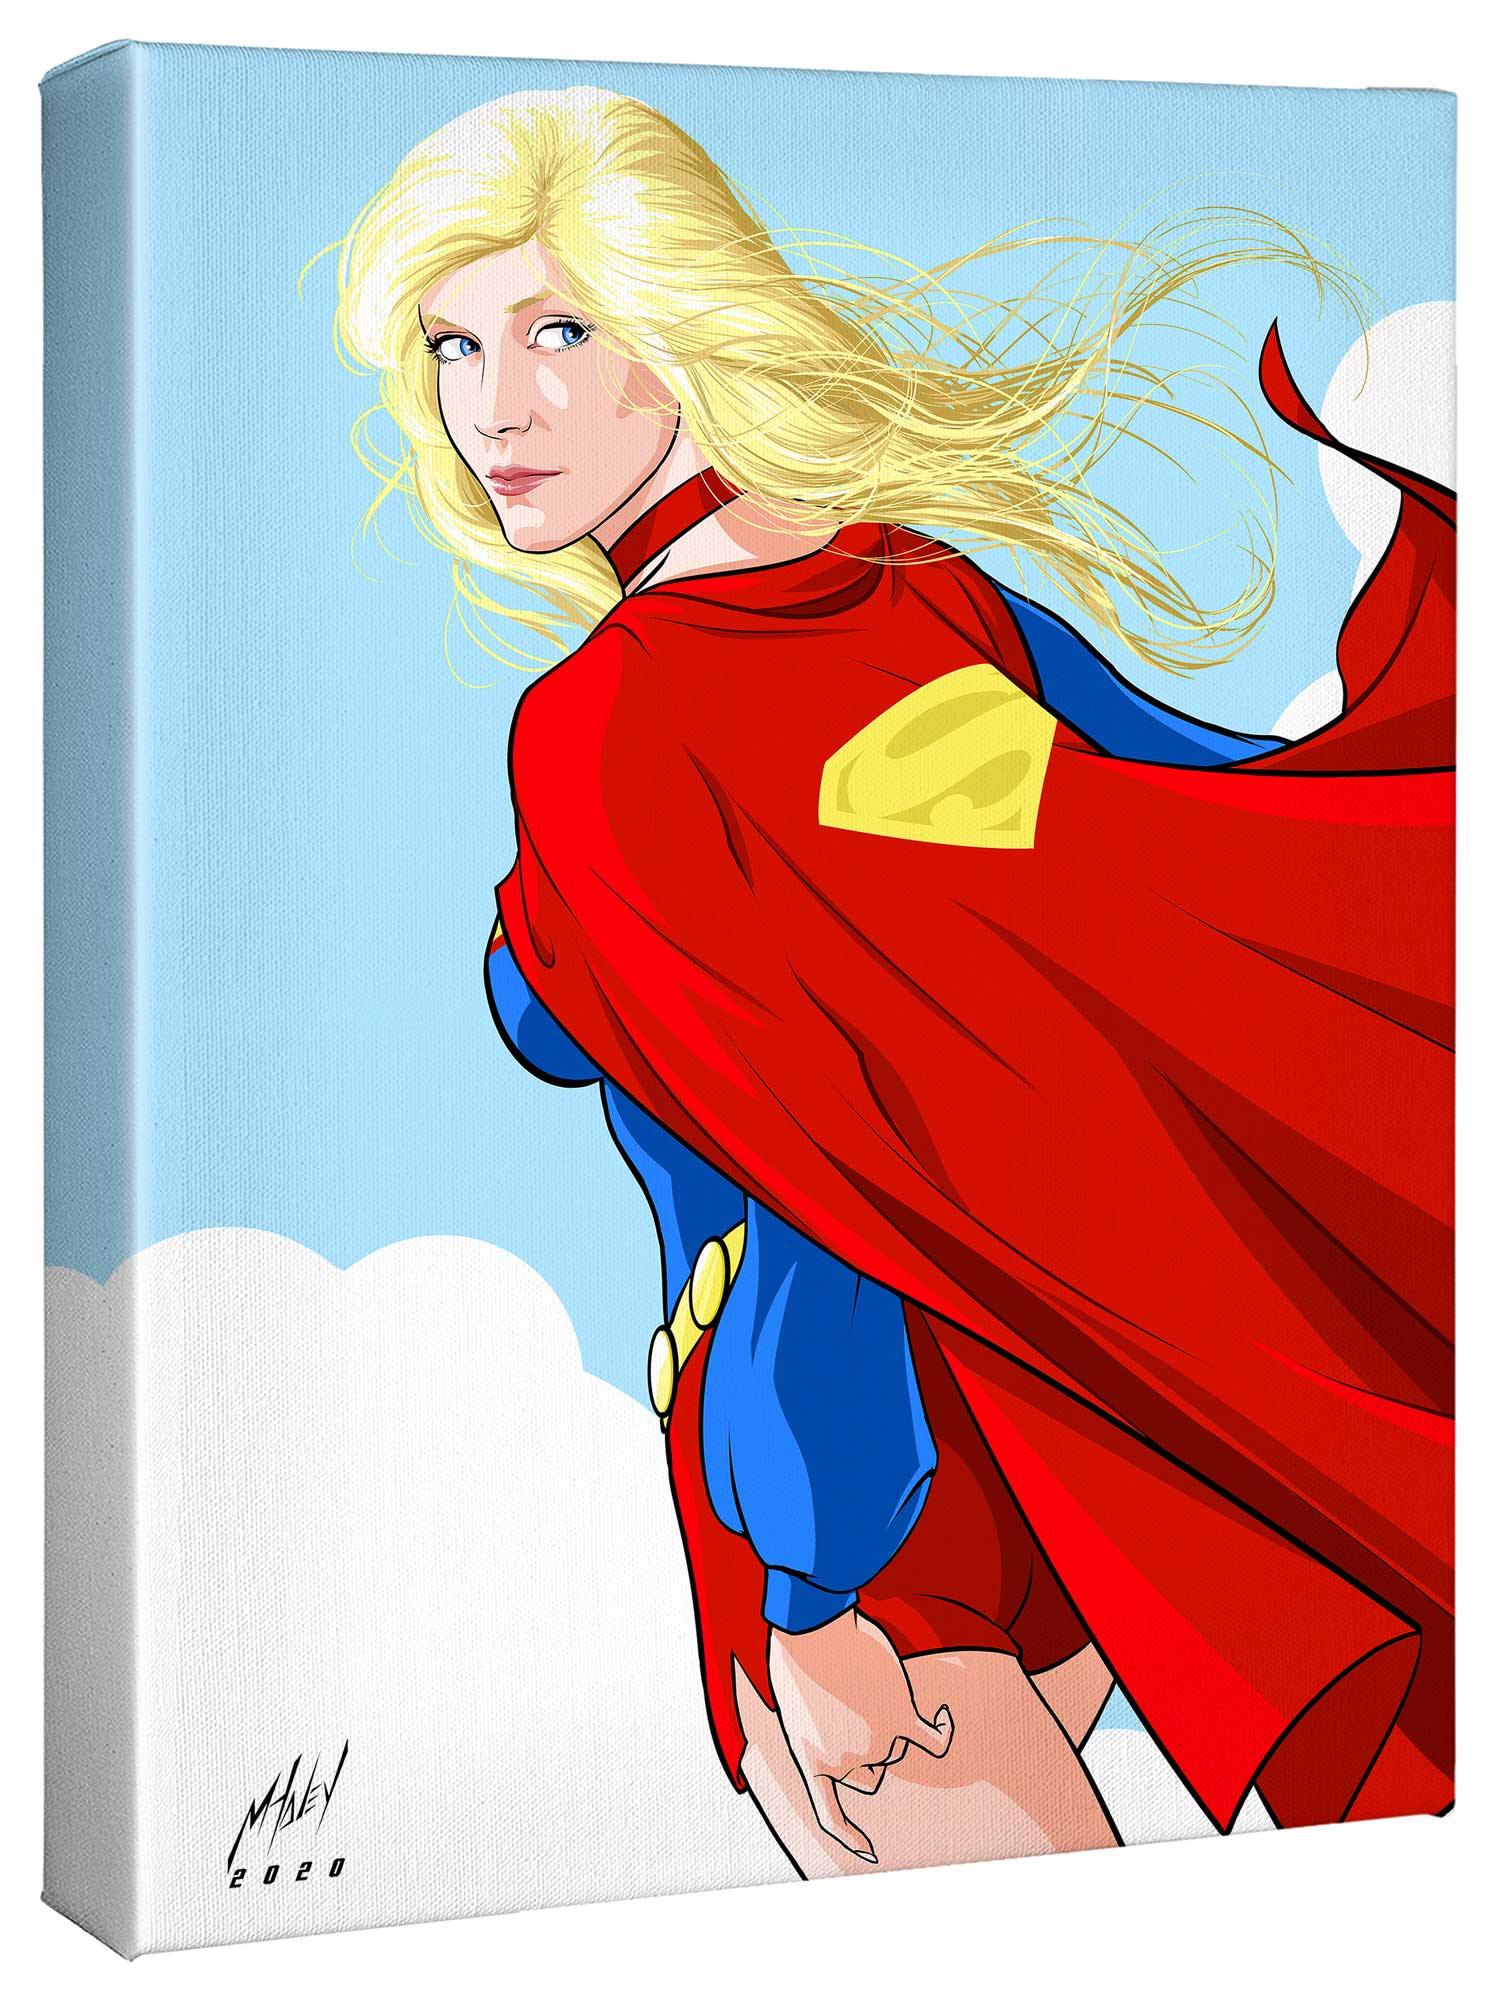 Supergirl, soars through the skies as Earth's mighty protector.